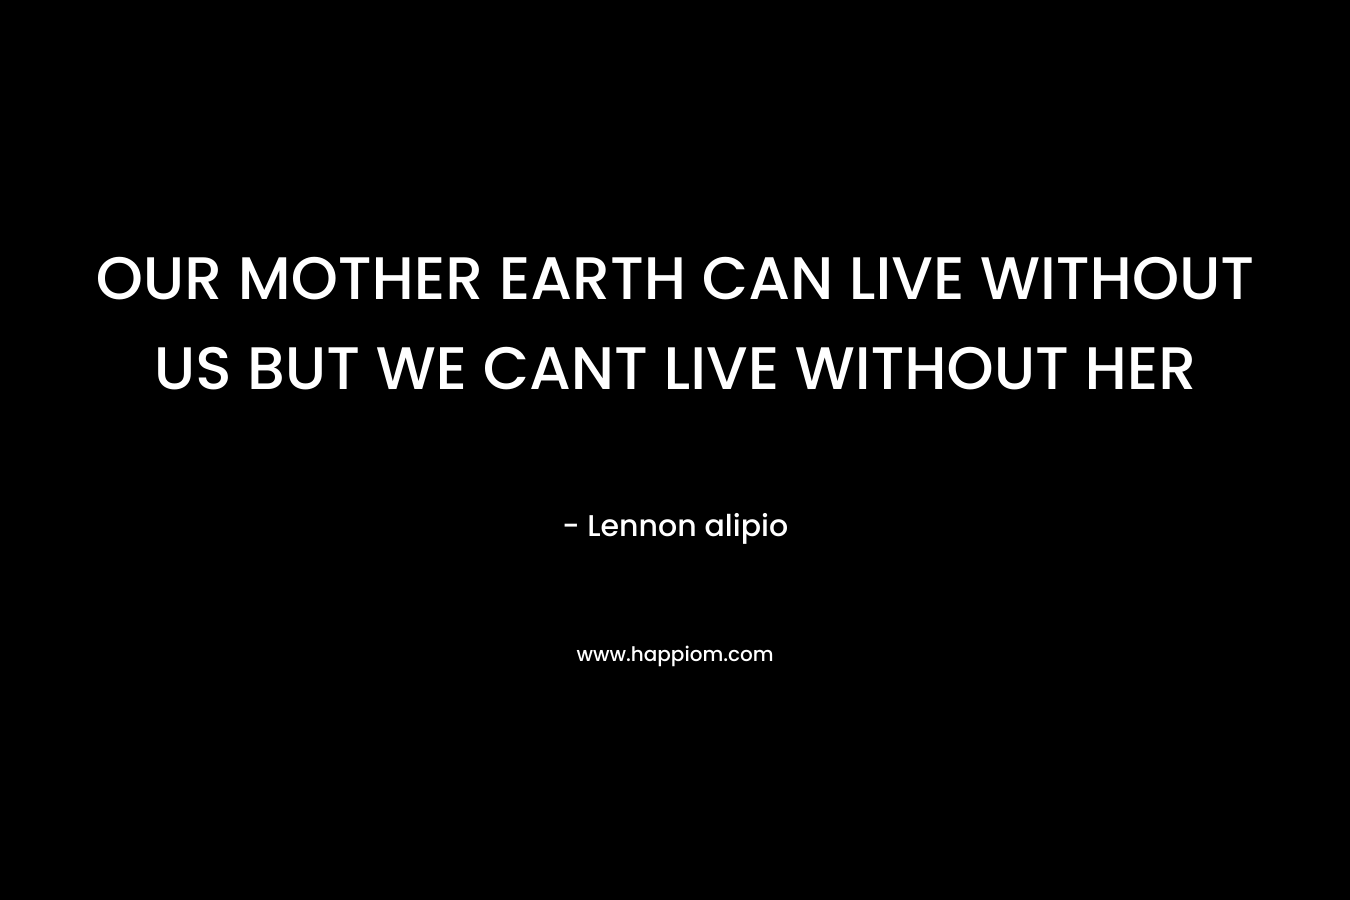 OUR MOTHER EARTH CAN LIVE WITHOUT US BUT WE CANT LIVE WITHOUT HER